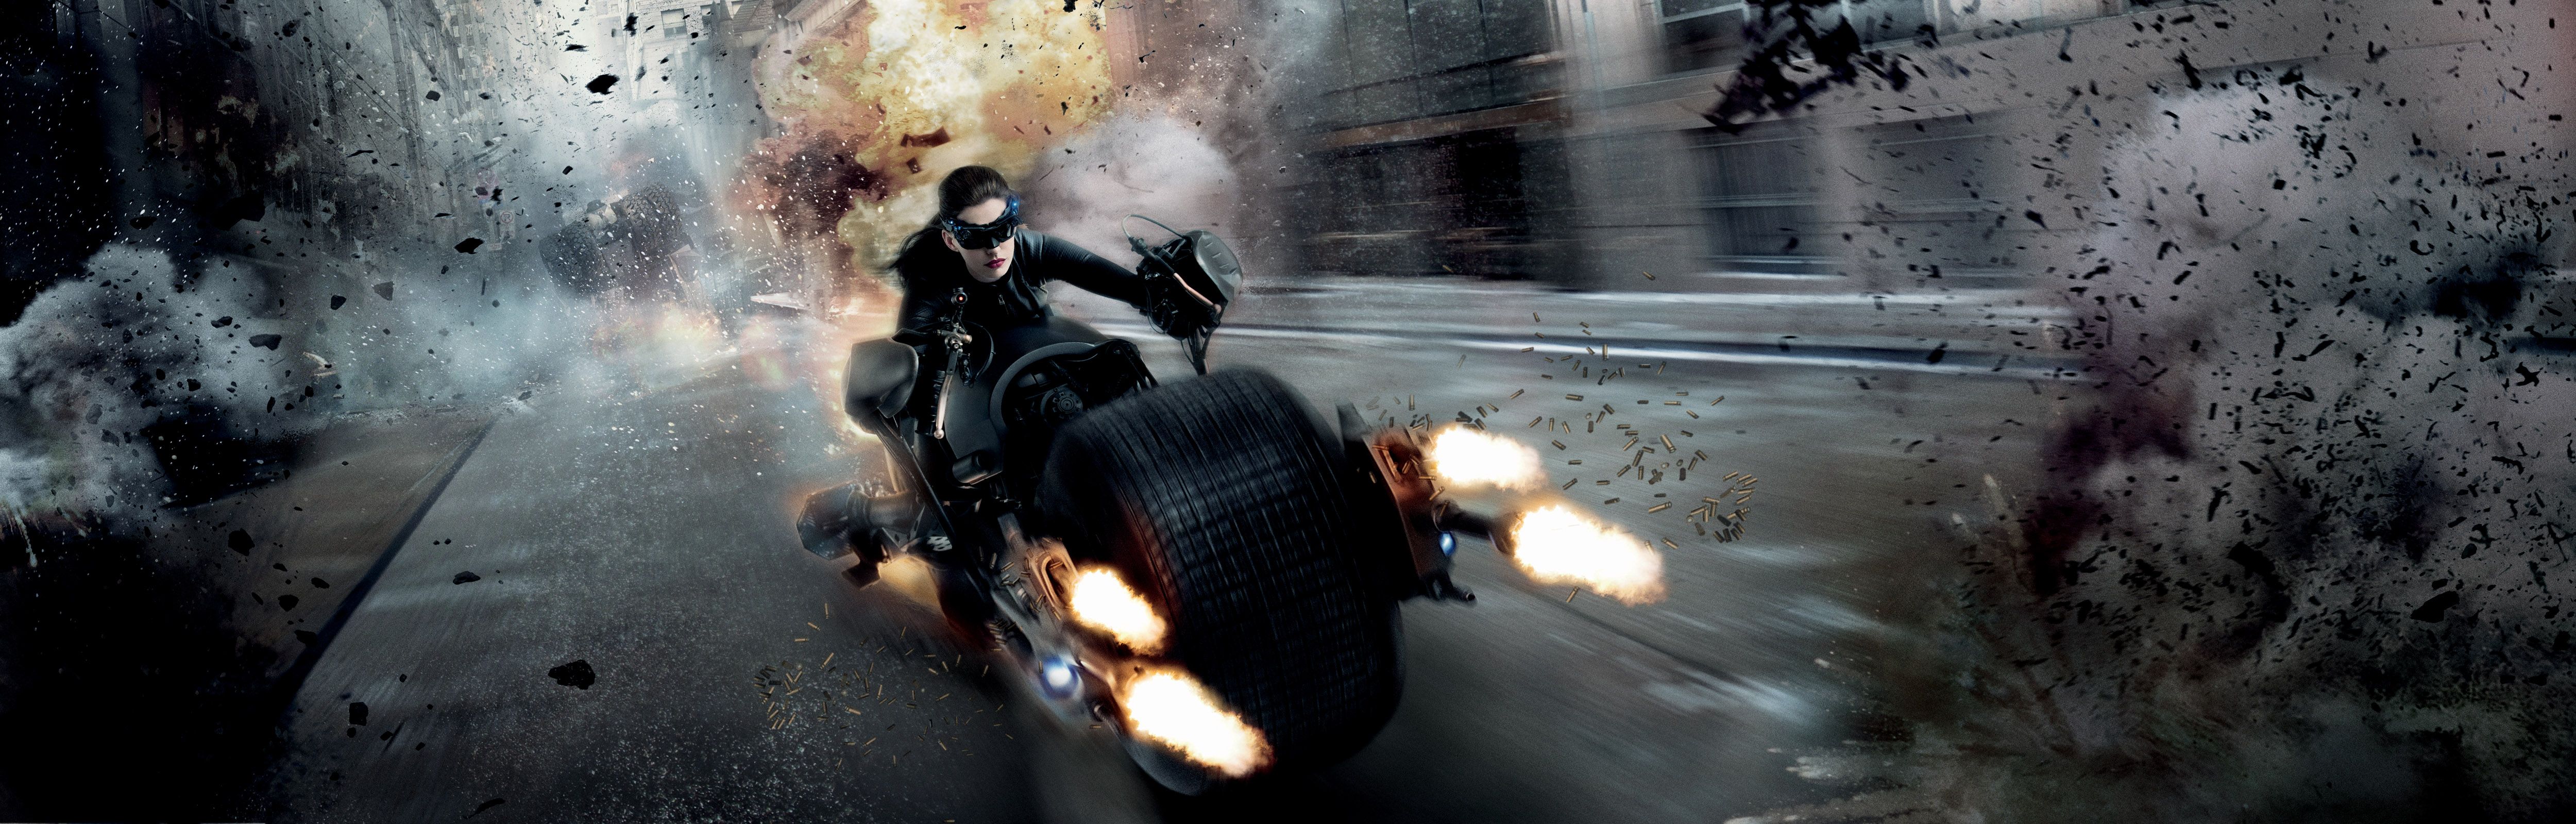 Wallpaper Catwoman, Anne Hathaway, The Dark Knight Rises, 5K, Movies,. Wallpaper for iPhone, Android, Mobile and Desktop